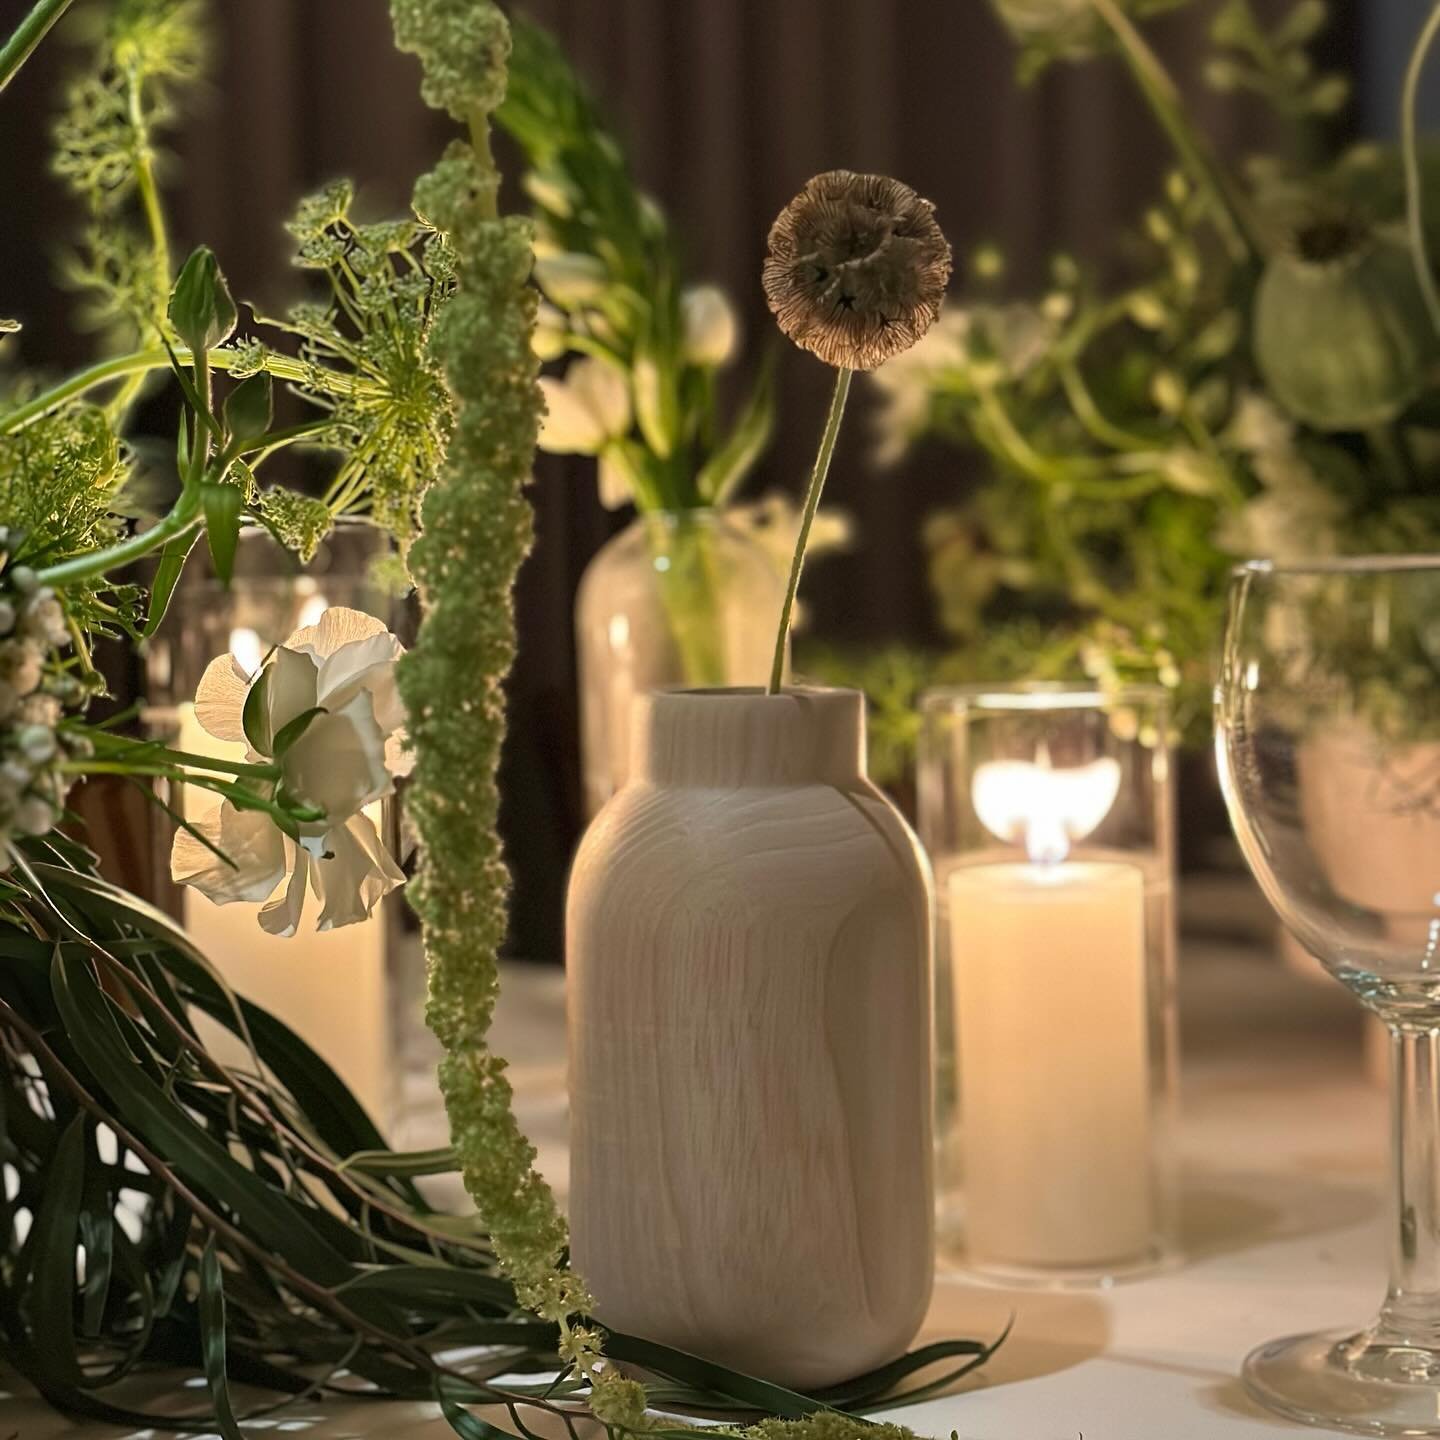 Inspired by the green, white and wooden aesthetic of the 1 Hotel, we achieved the perfect balance between feminine and chic for this birthday dinner. | #eventdujour X @arakssa 🖤